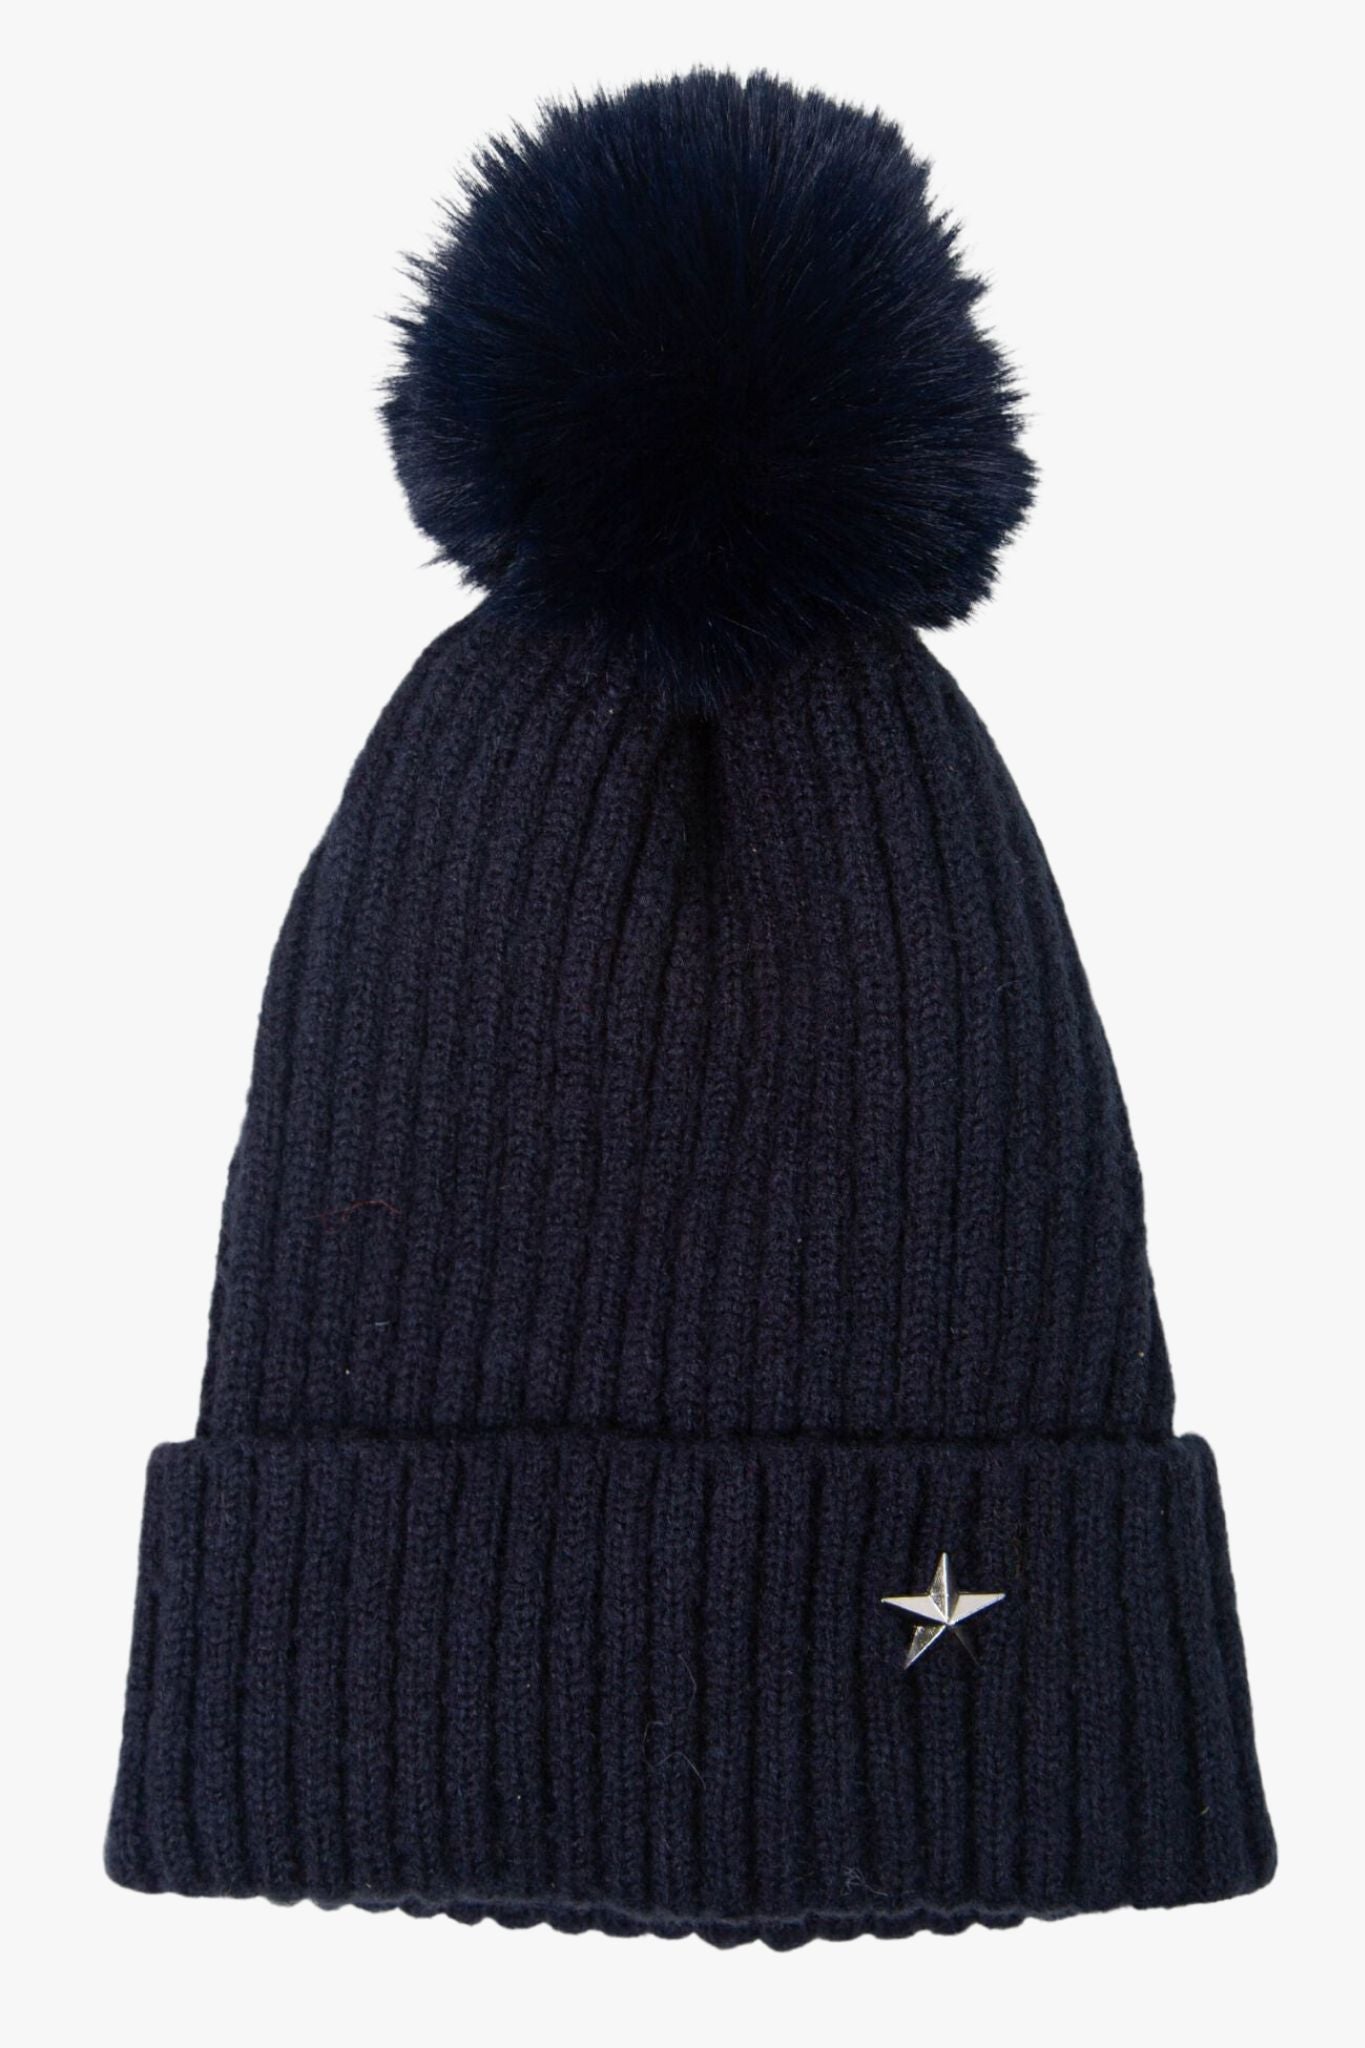 navy blue winter hat with pom pom and a silver metal star motif on the rim